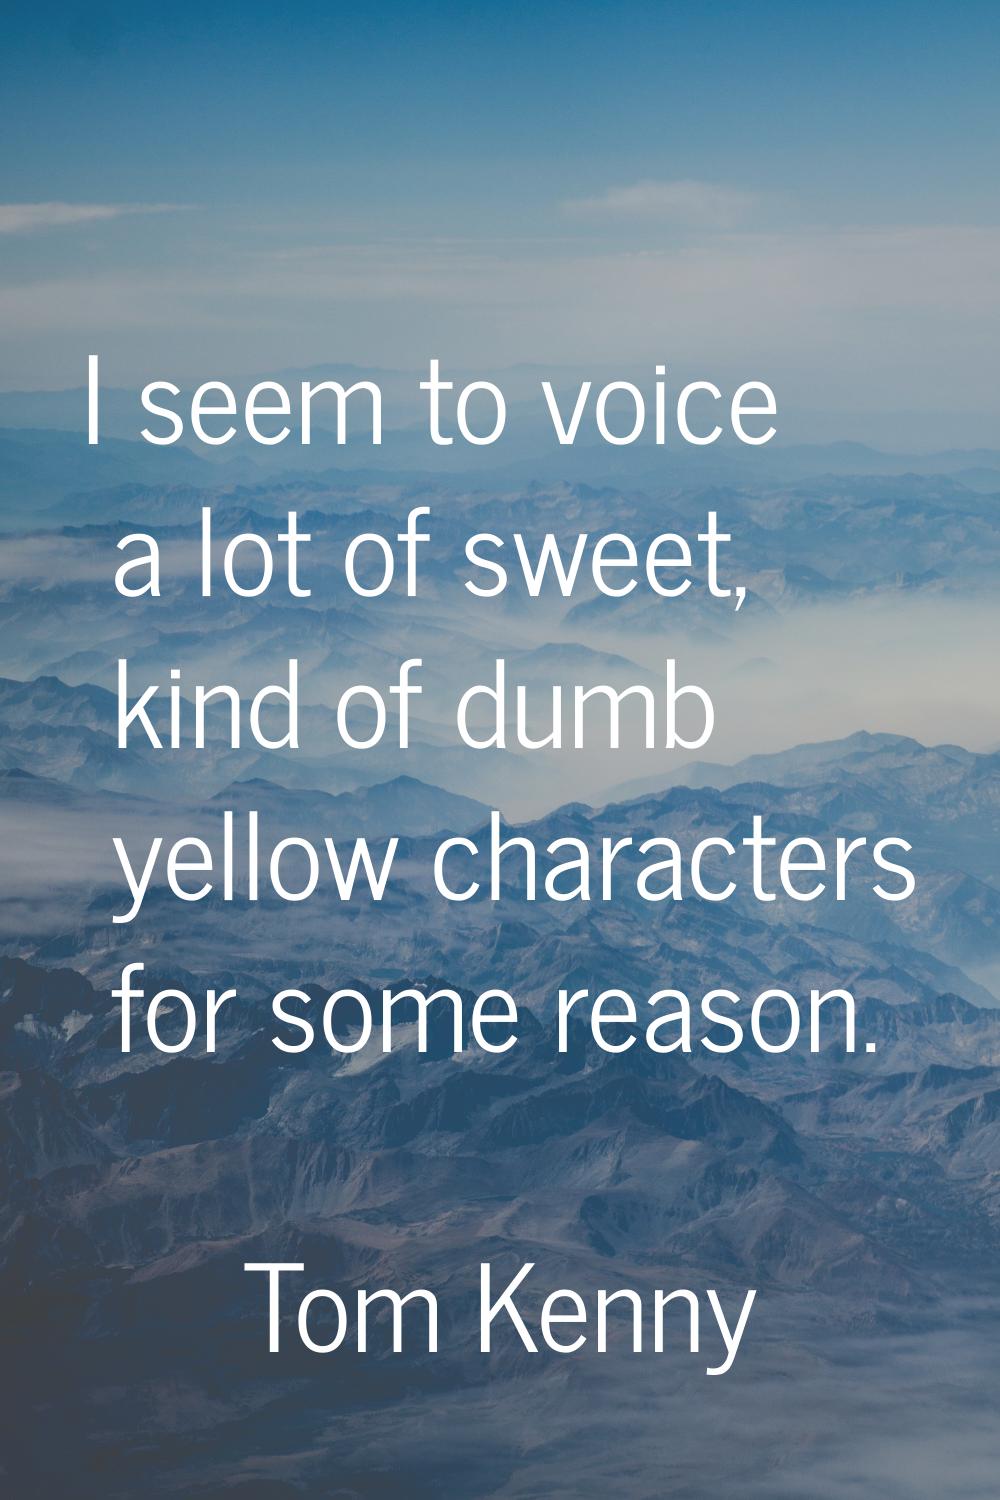 I seem to voice a lot of sweet, kind of dumb yellow characters for some reason.